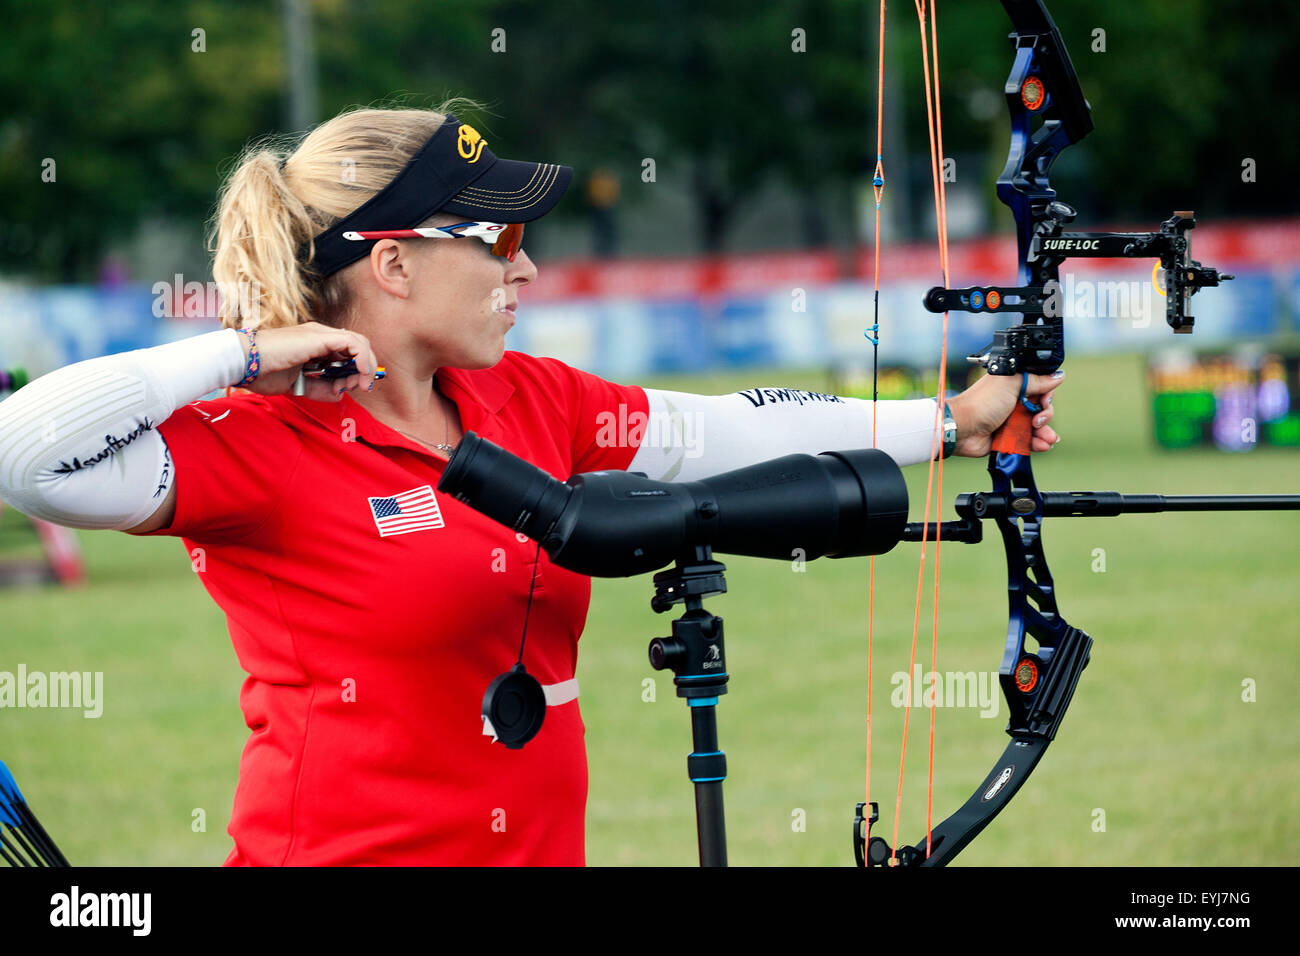 Copenhagen, Denmark, July 30th, 2015: US archer Crystal Gauvin competes in the World Archery Championships in Copenhagen during Thursday's individual matches  in compound bow. Credit:  OJPHOTOS/Alamy Live News Stock Photo